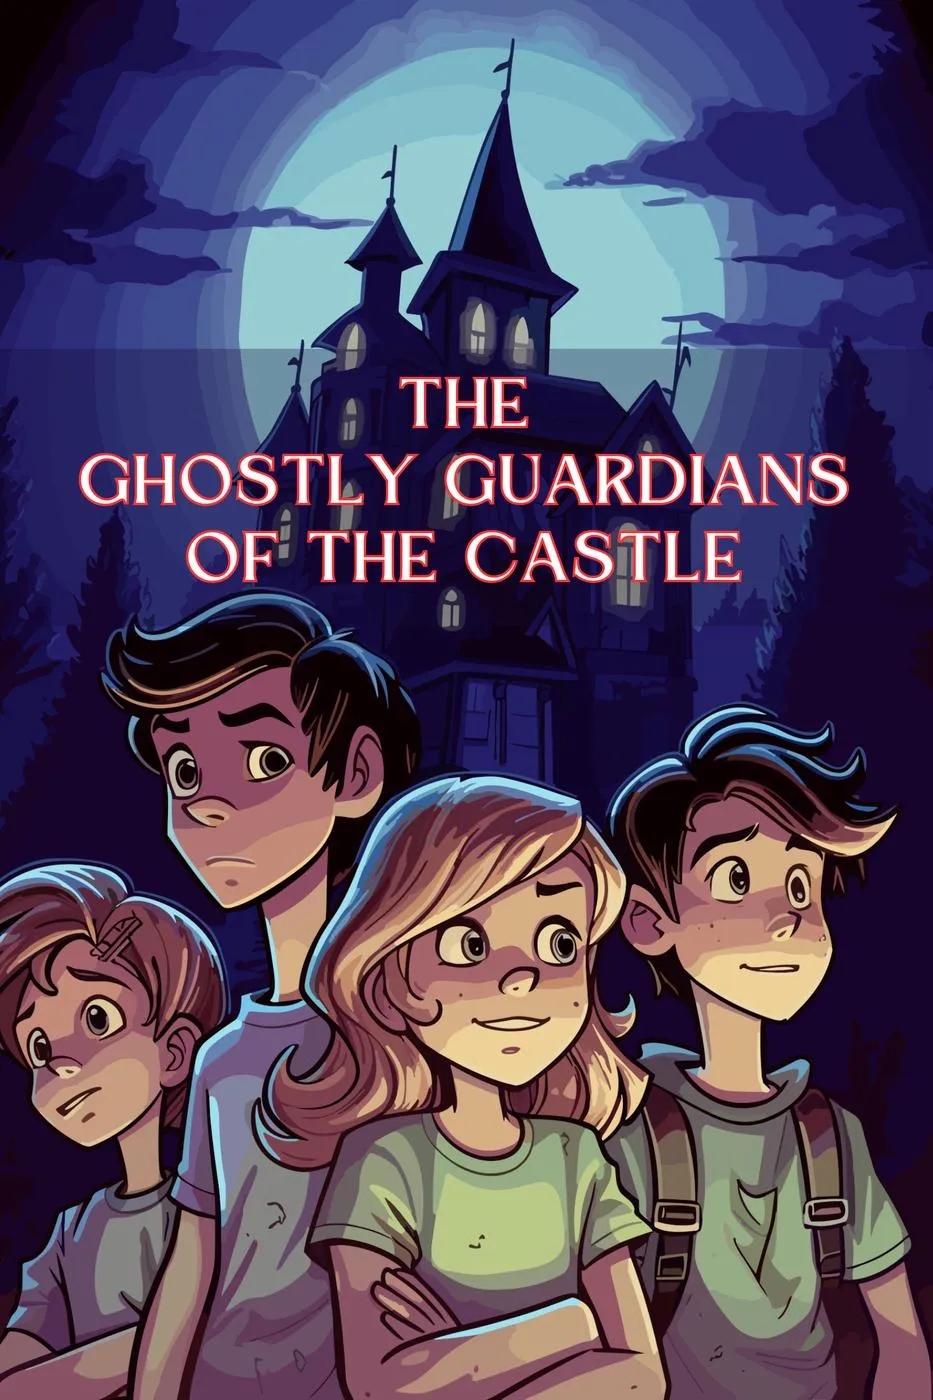 The Ghostly Guardians of the Castle